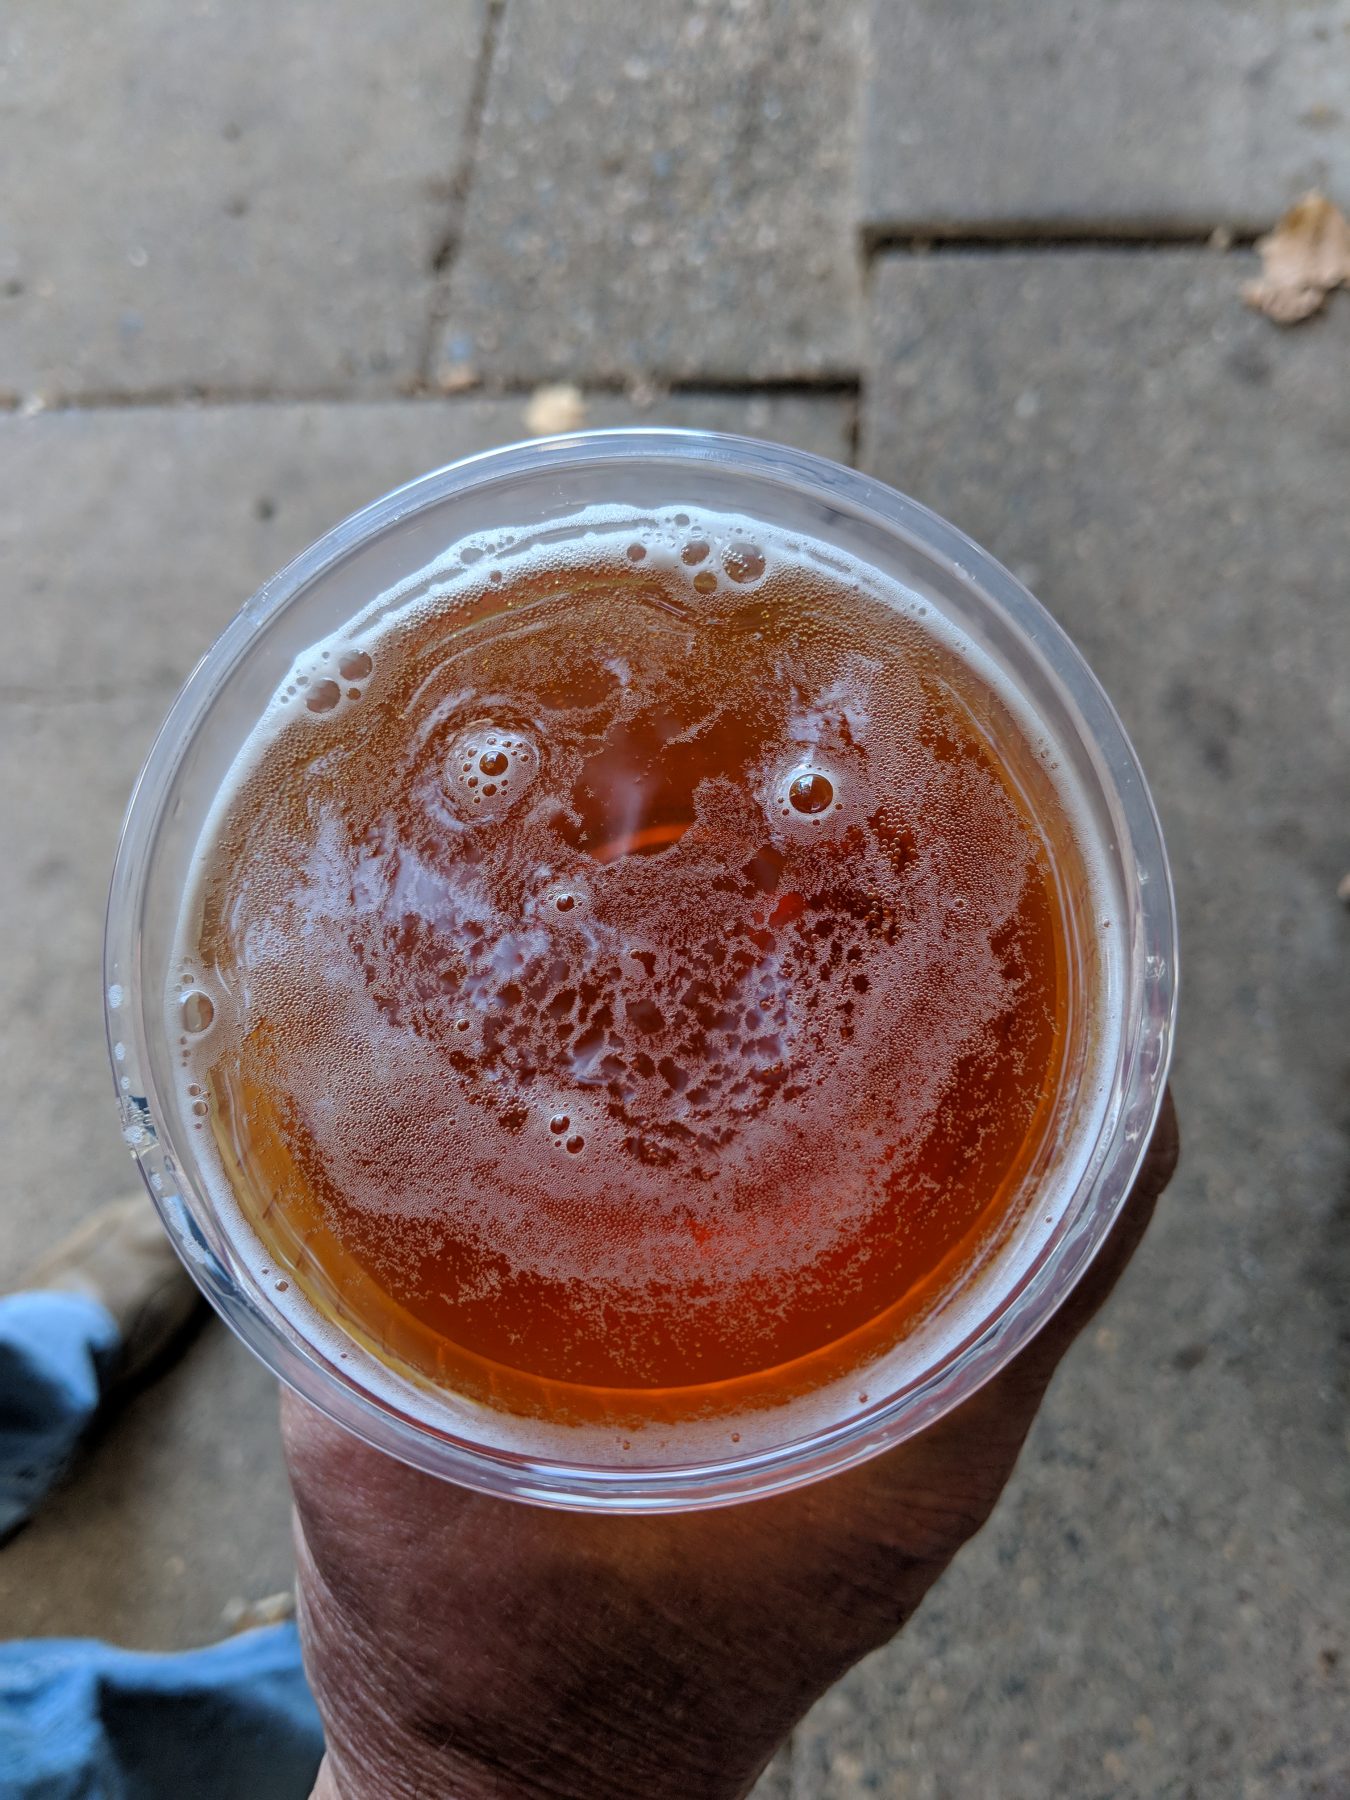 Top of beer cup with smiley face in foam